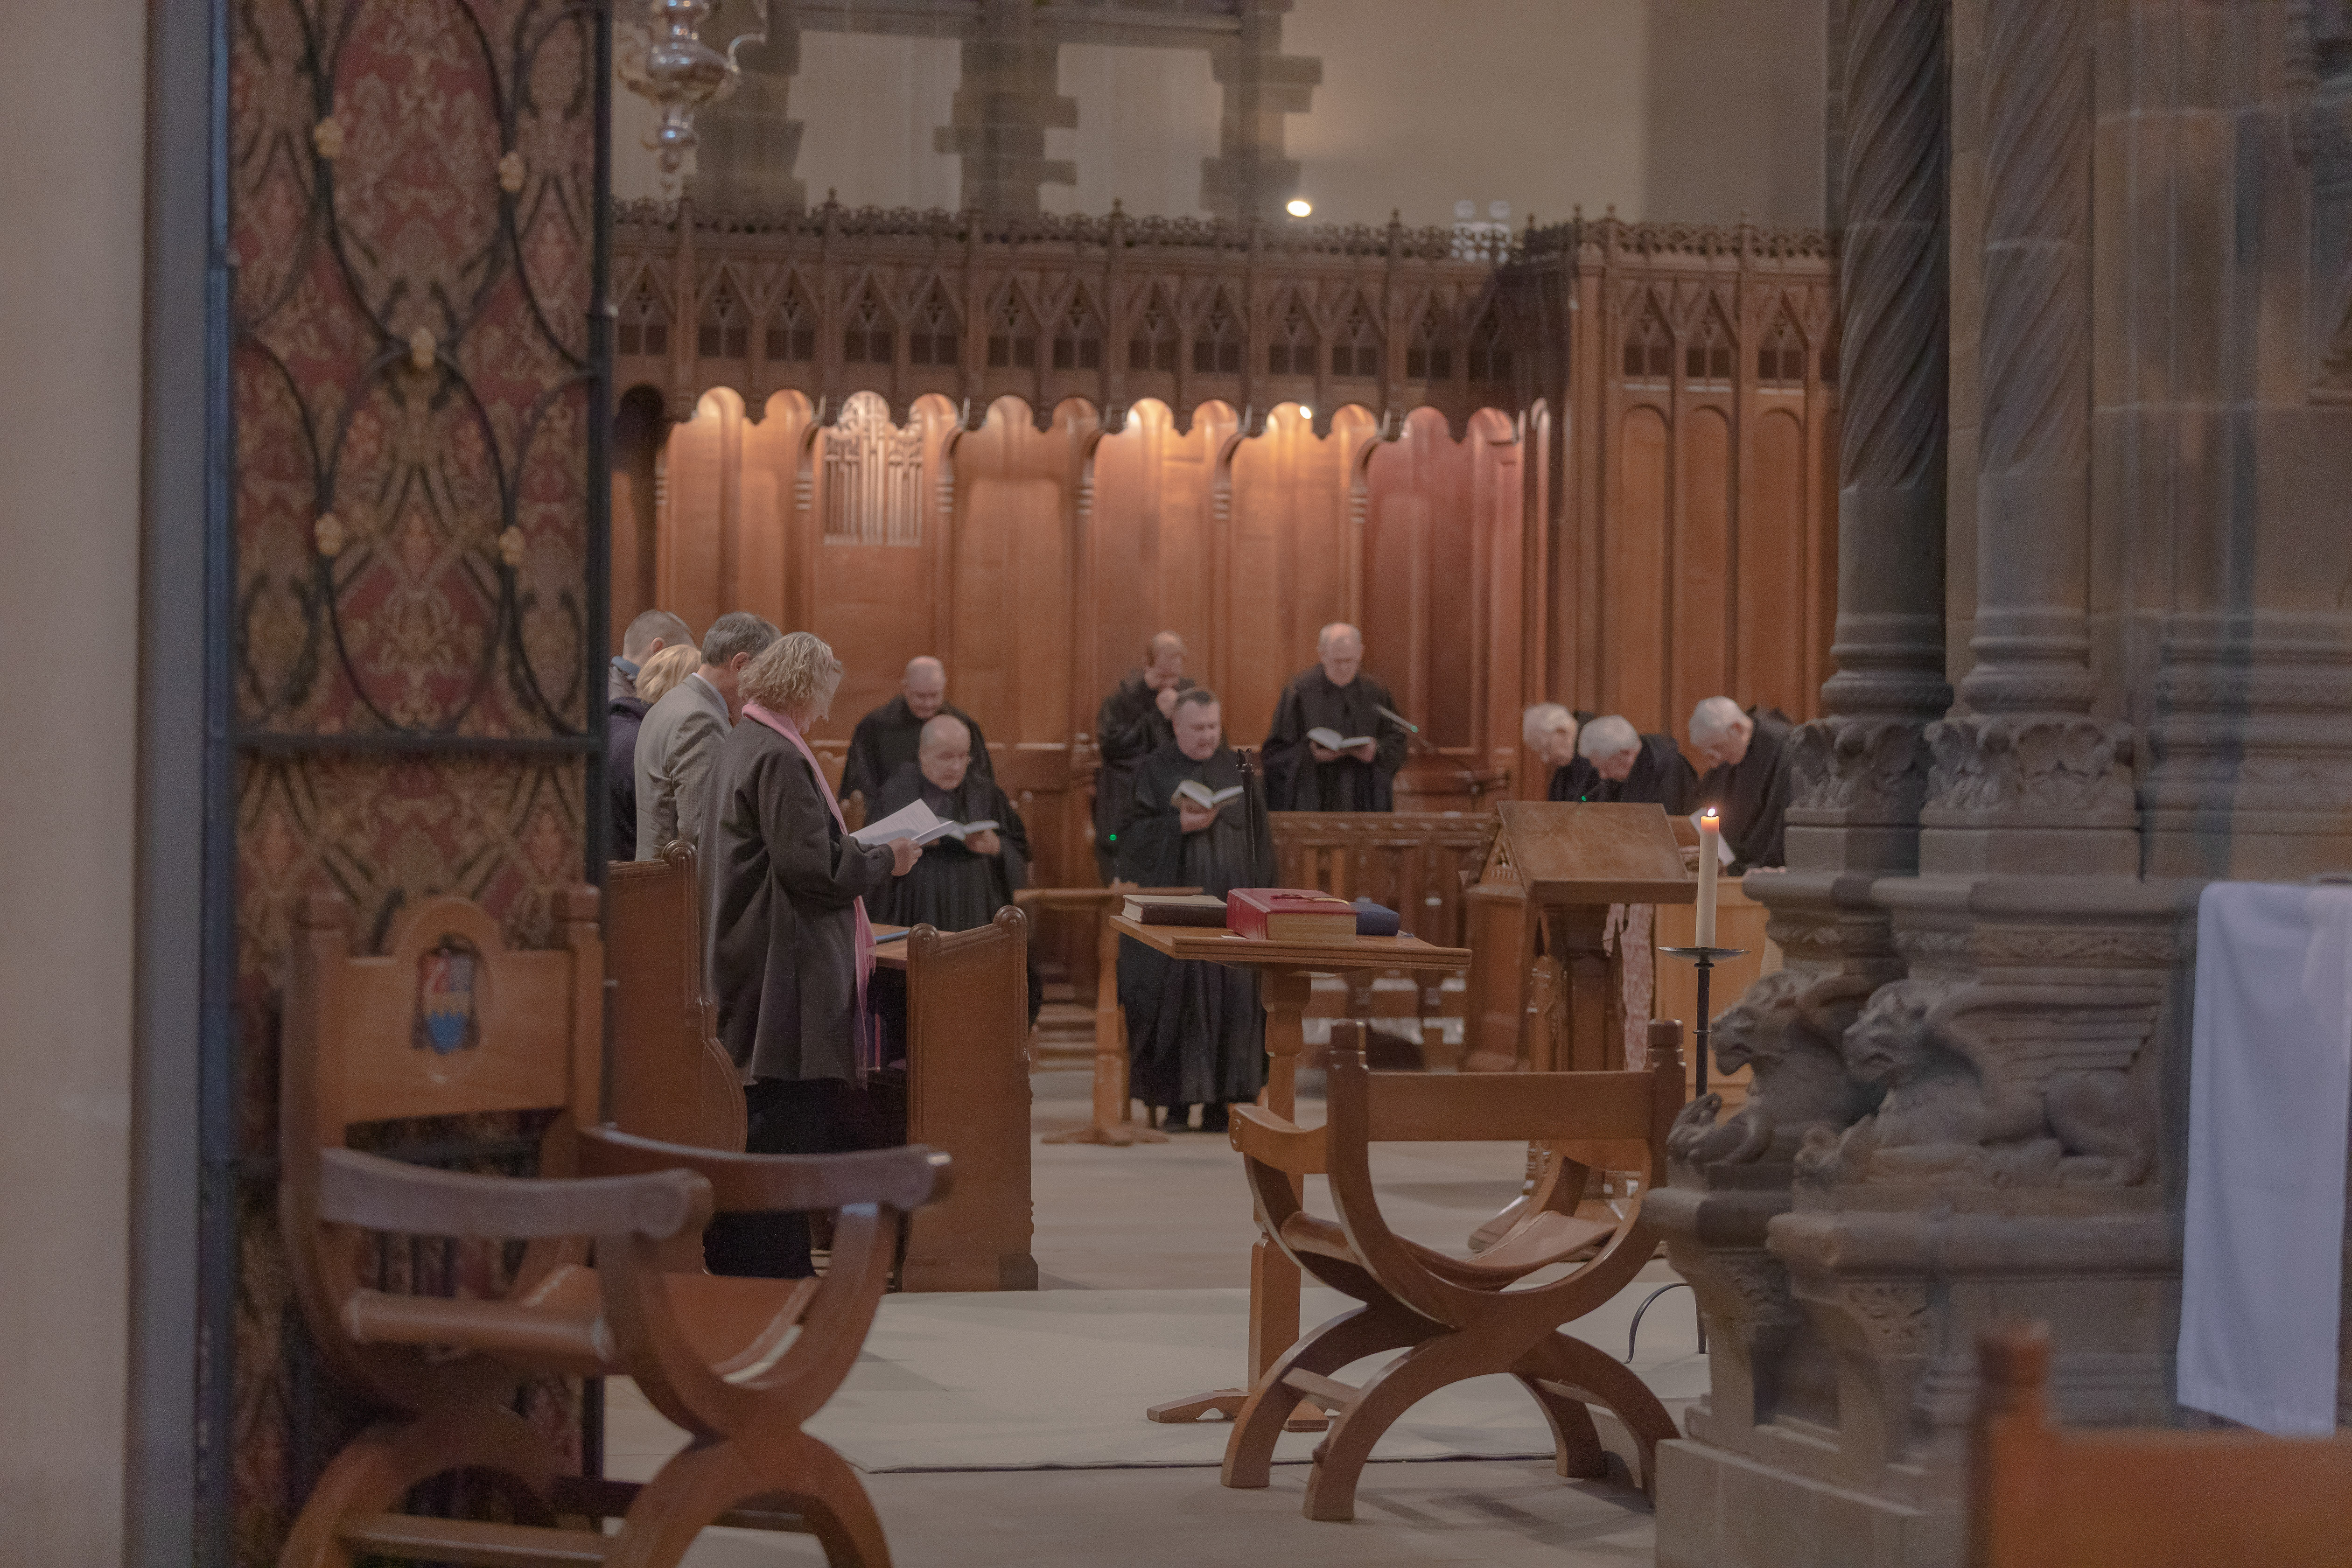 Ampleforth monks praying Vespers in the Abbey Church